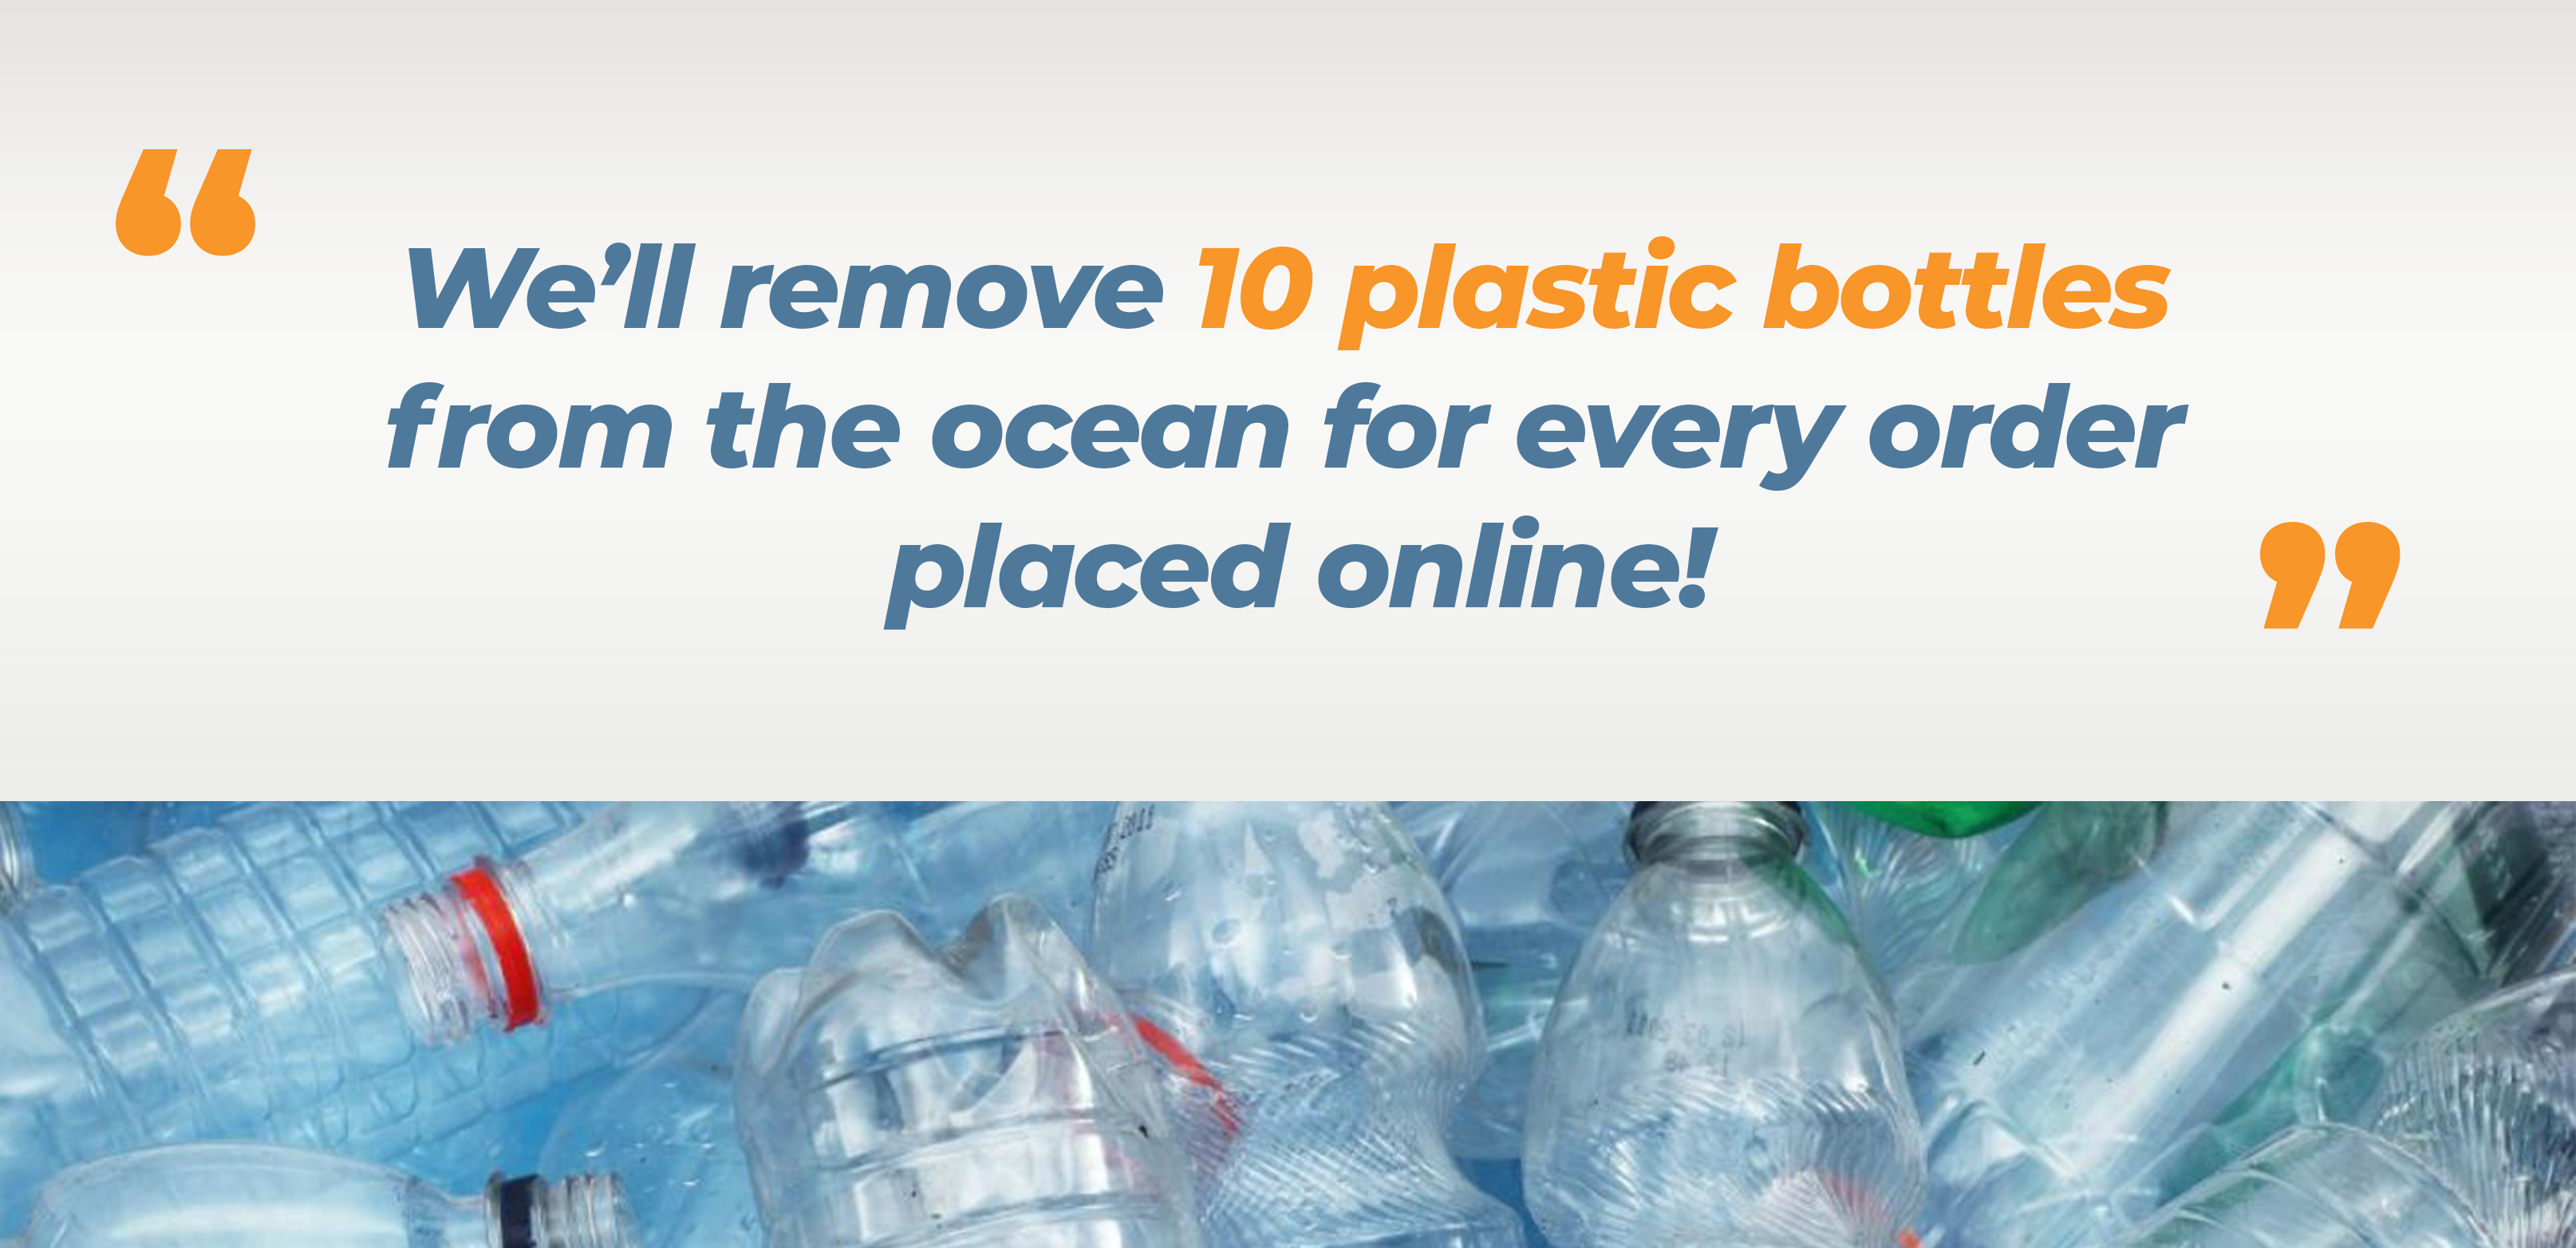  Plastic ID will remove 10 plastic bottles from the ocean for every order placed online